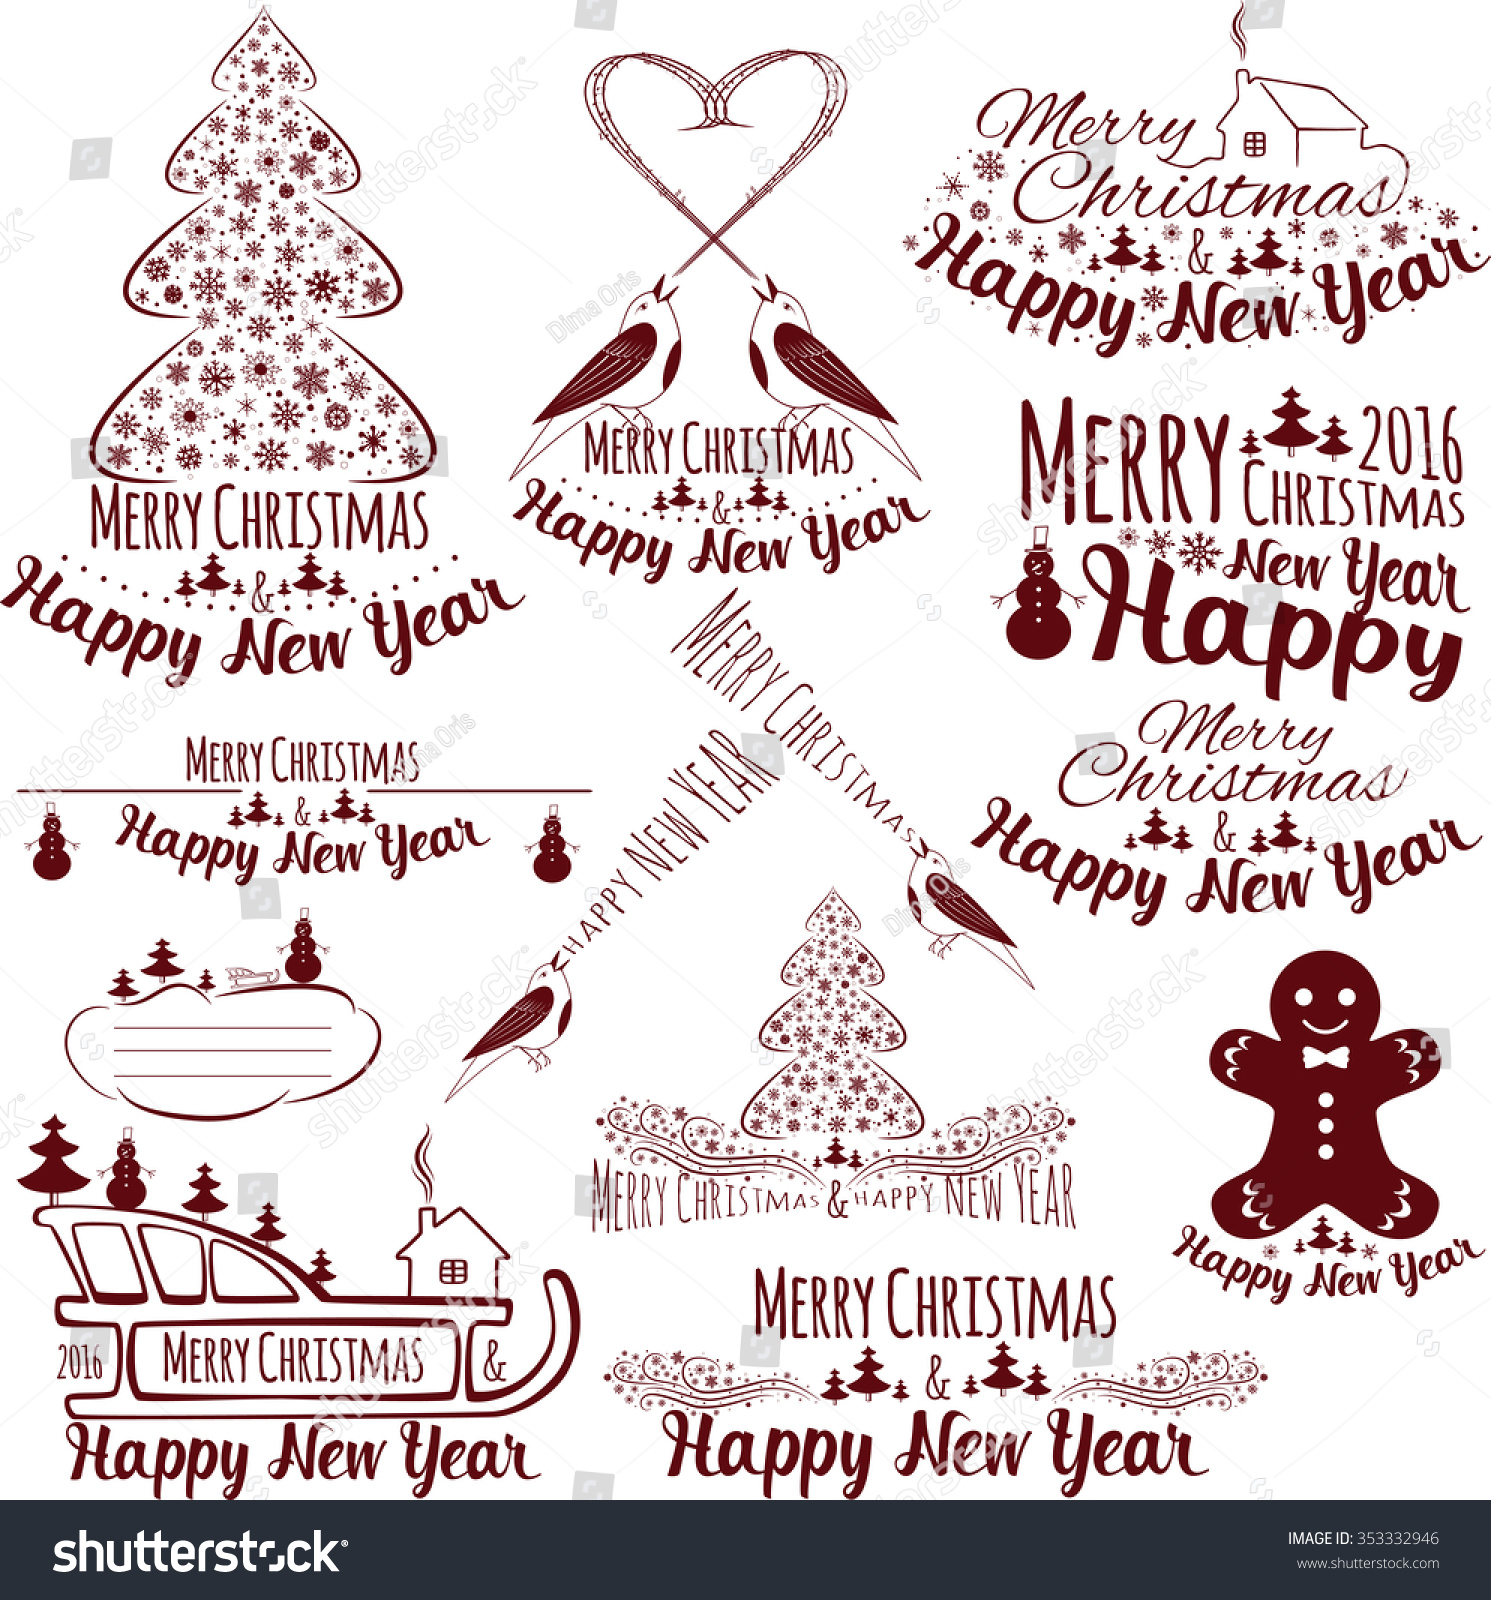 Happy New Year and Merry Christmas Holiday card